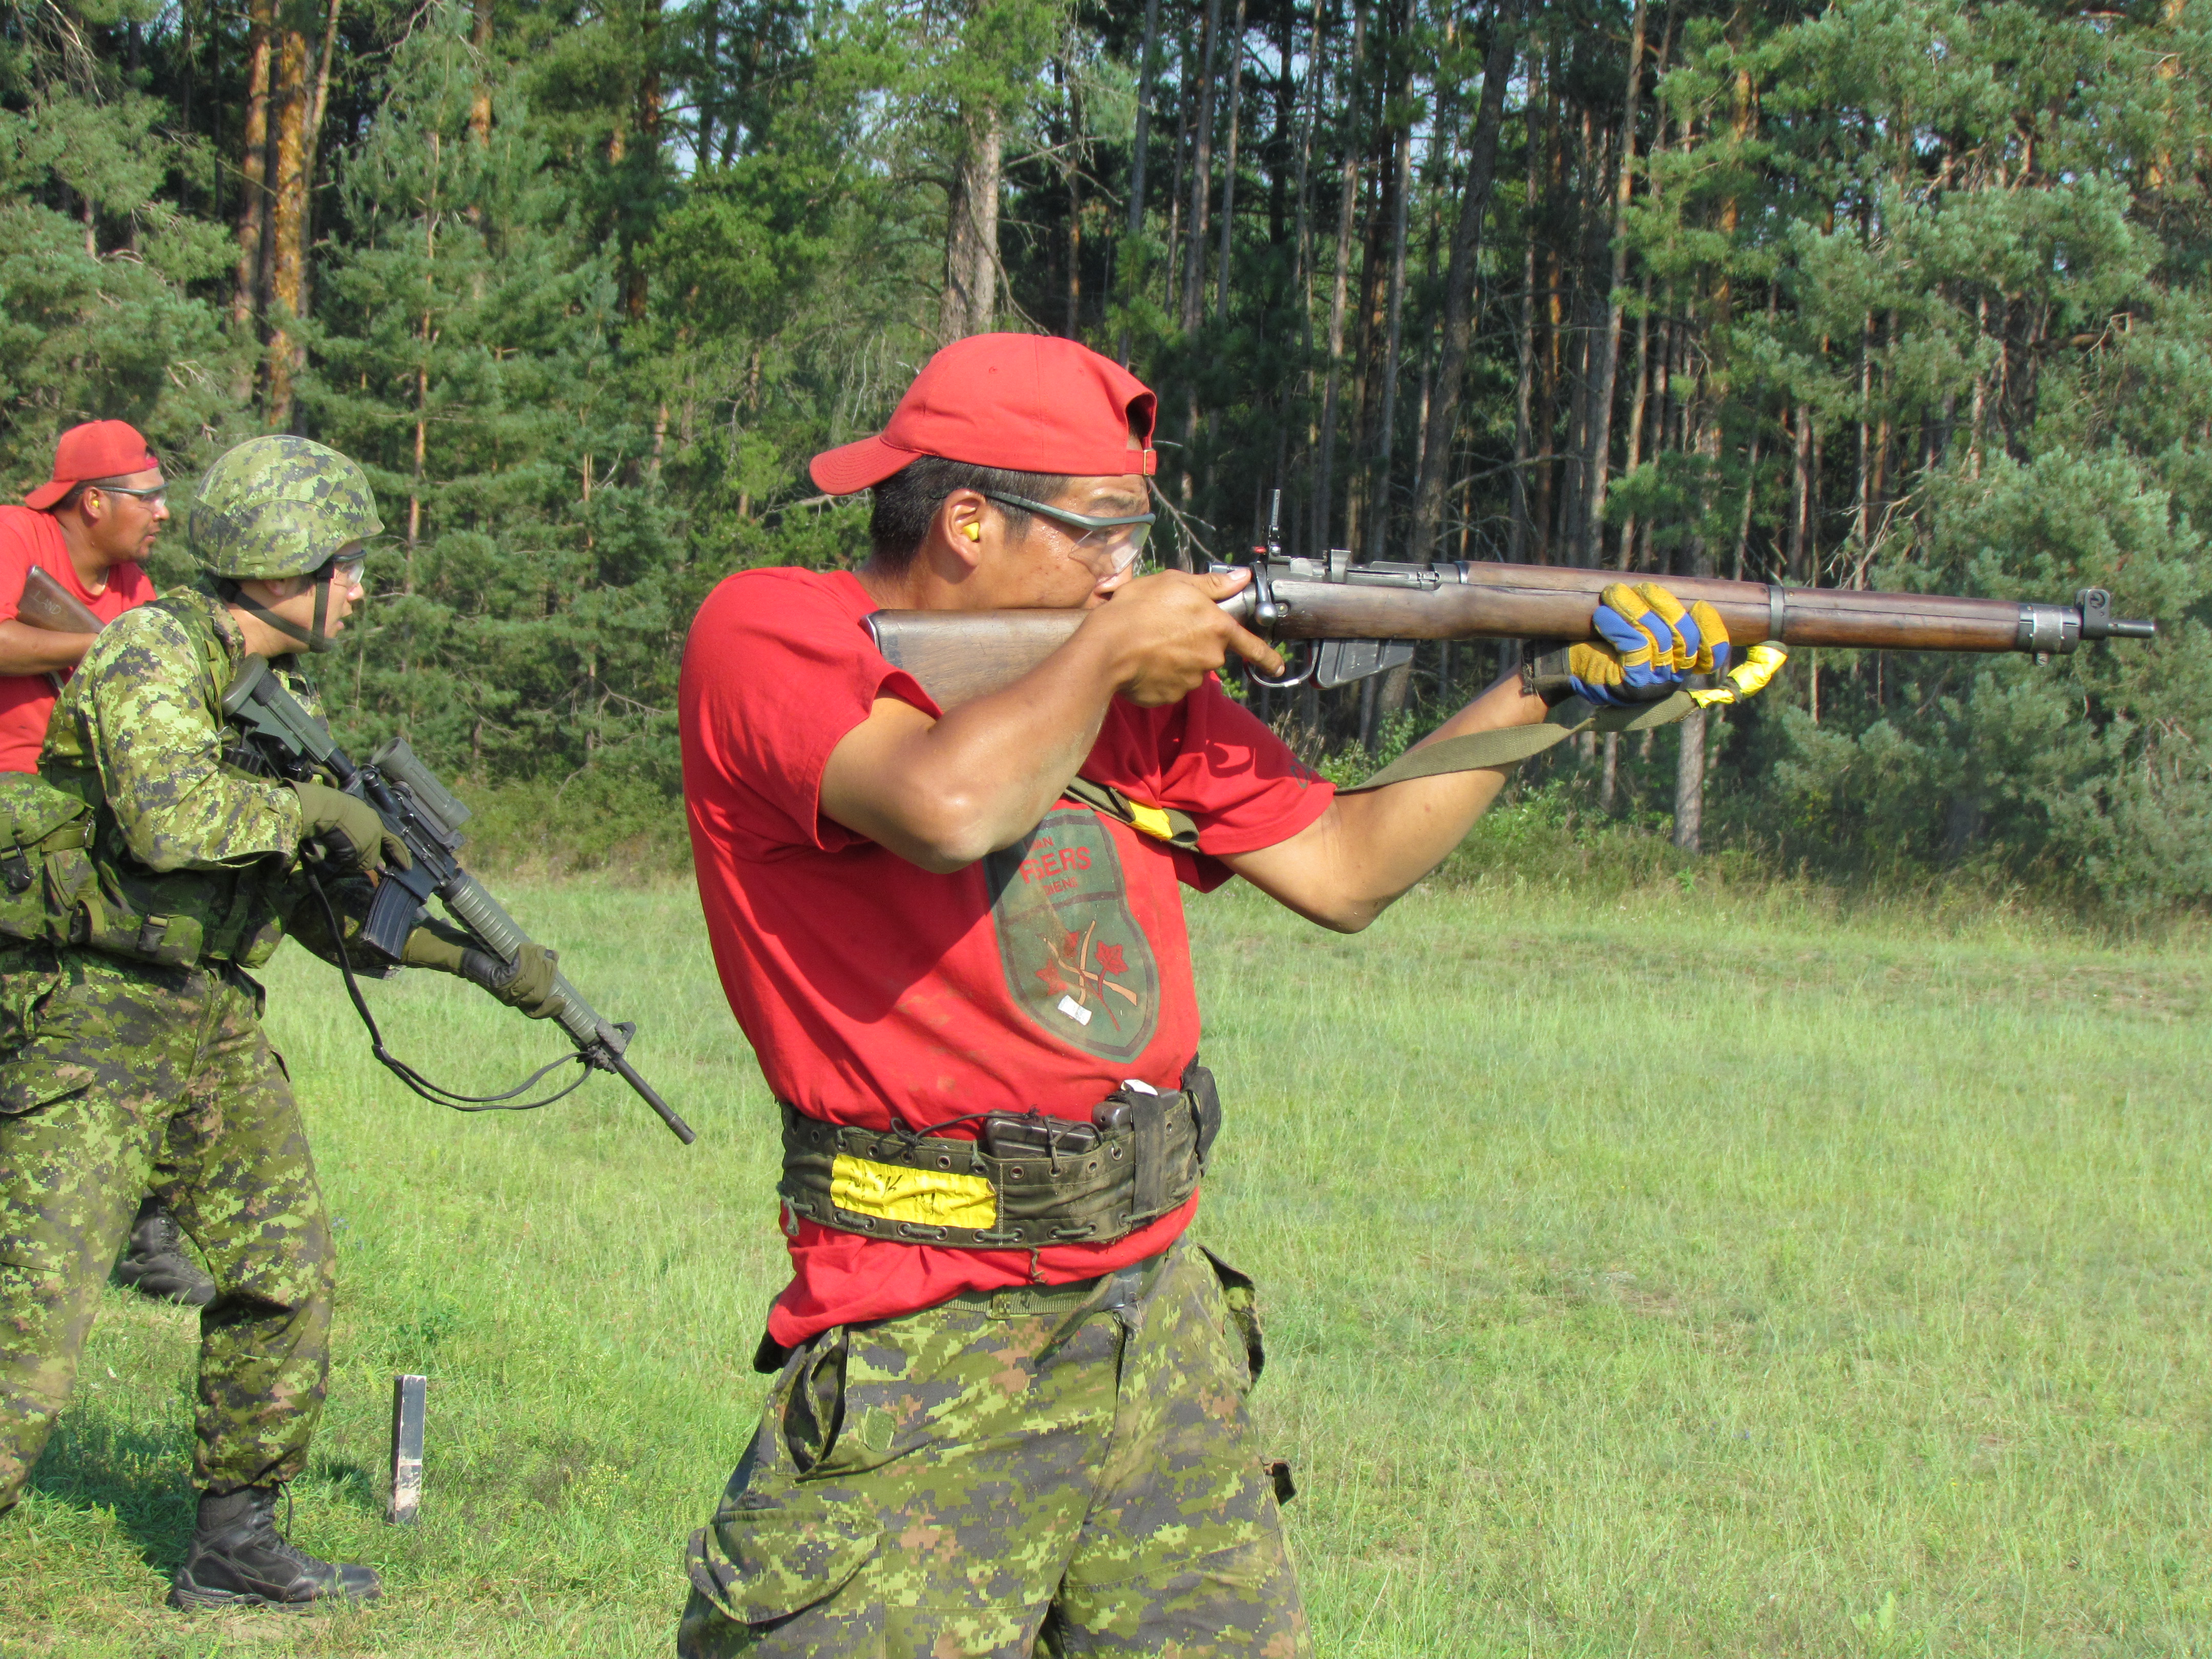 The Lee Enfield Finally Leaves Canadian Ranger Service